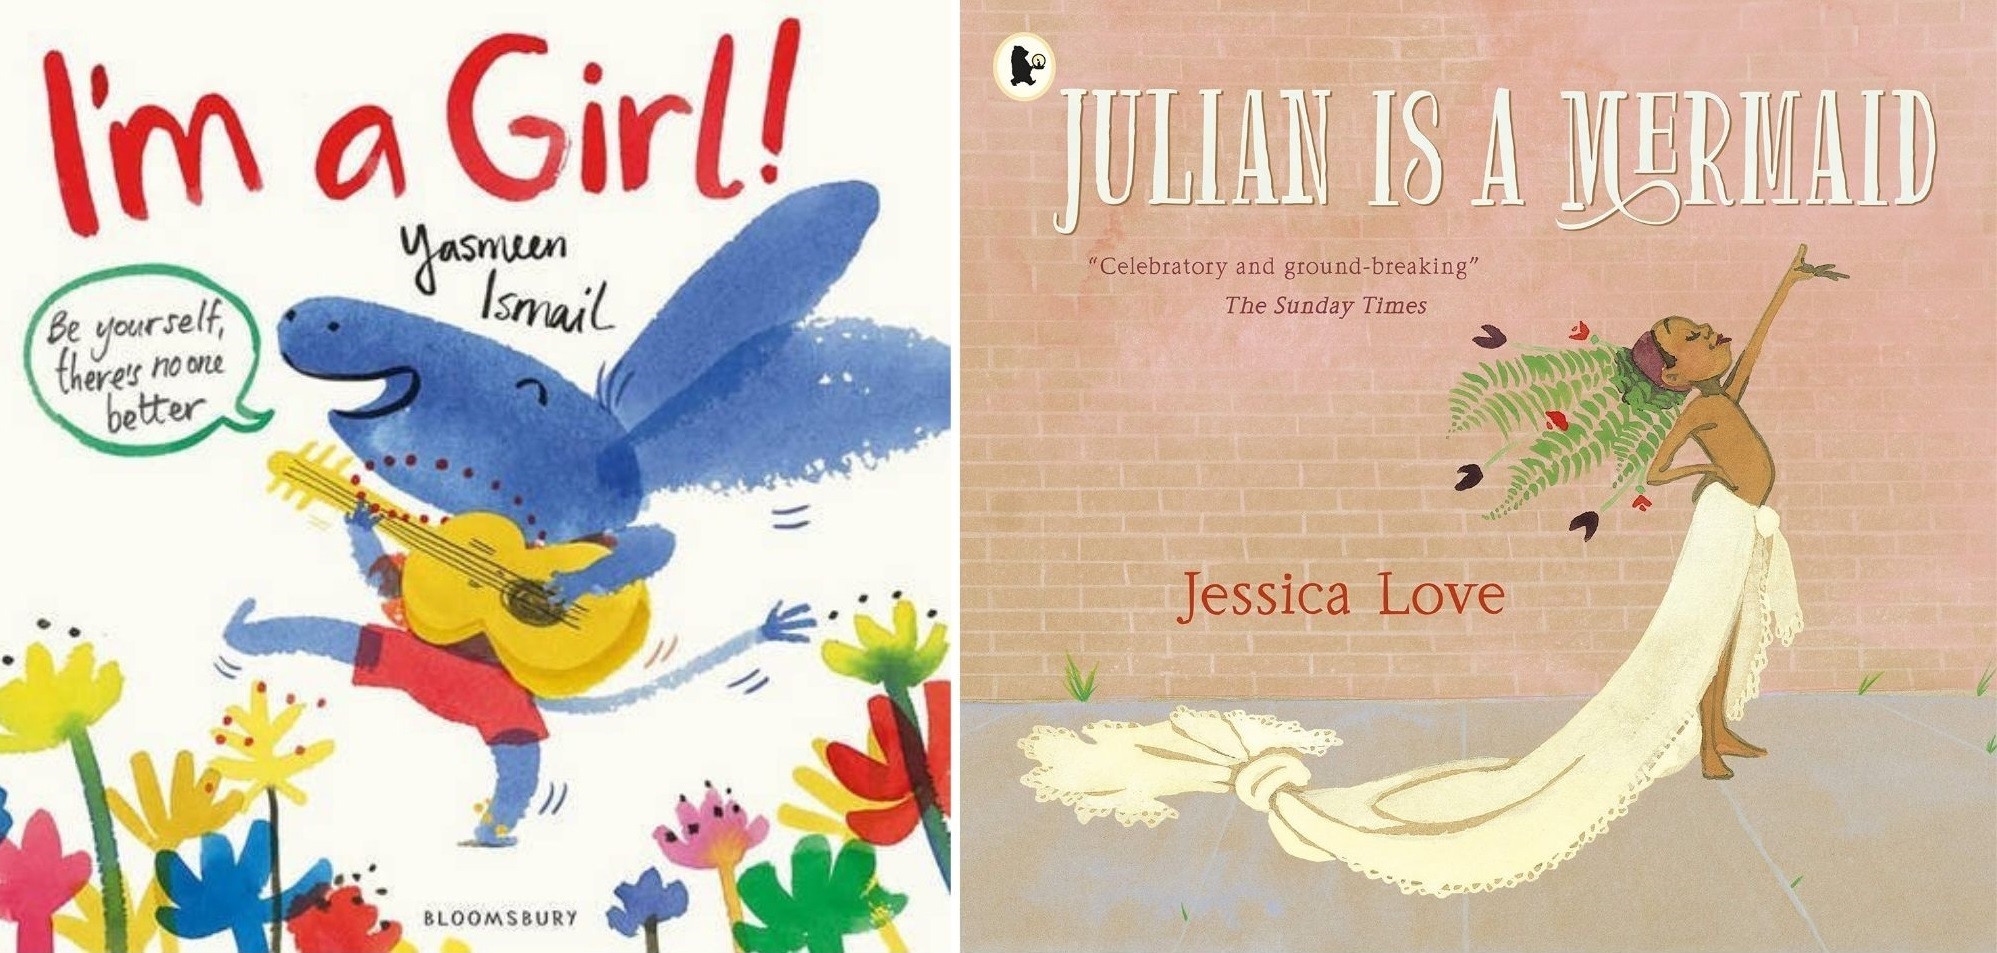 Im a Girl by Yasmeen Ismail and Julian is a Mermaid by Jessica Love.